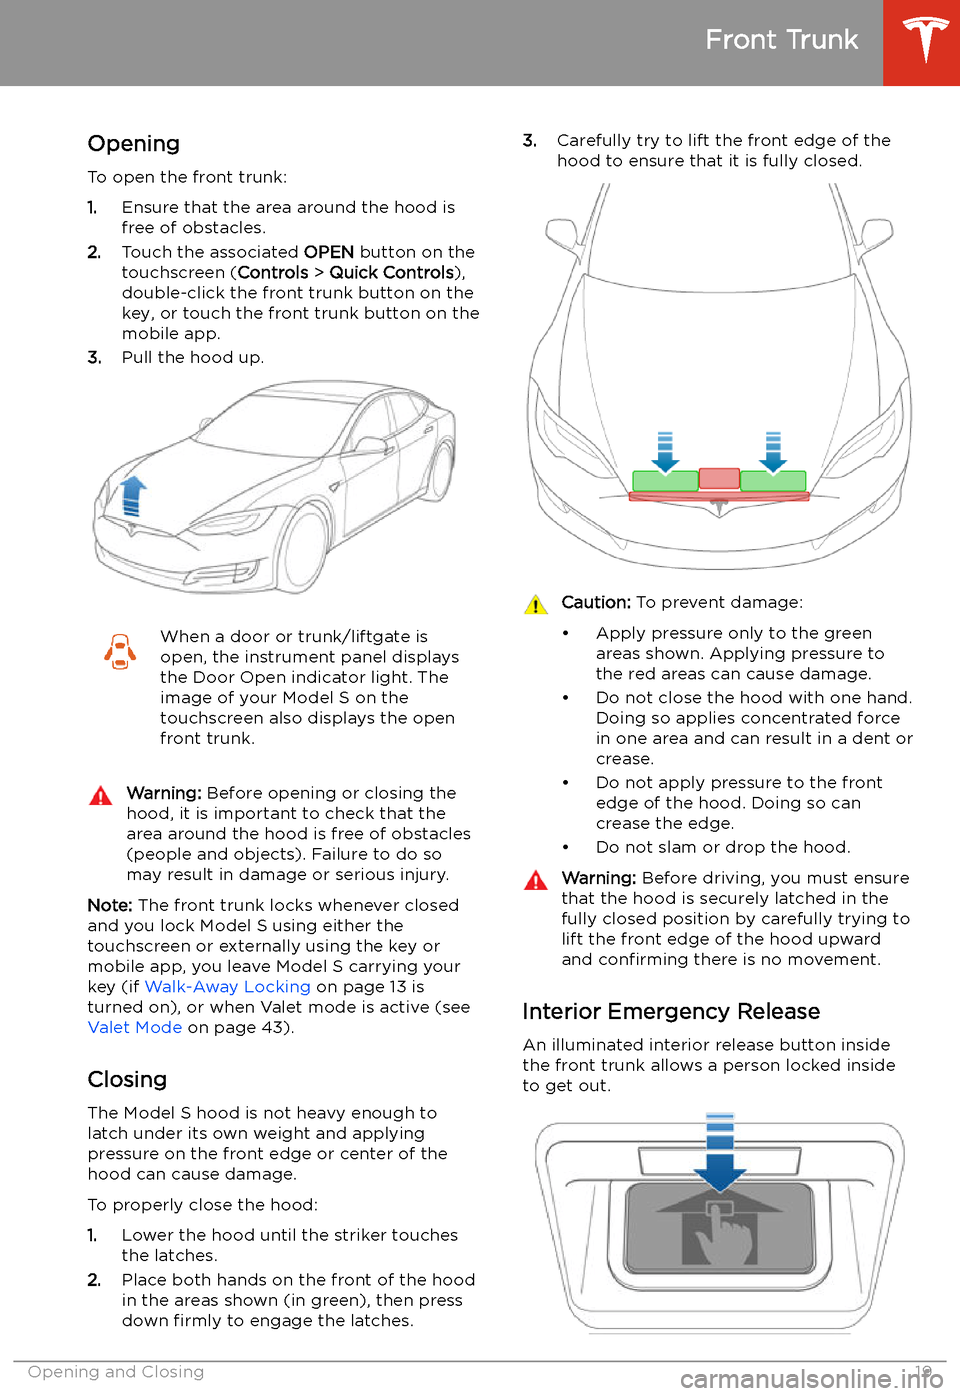 TESLA MODEL S 2020  Owners Manual Front Trunk
Opening
To open the front trunk:
1. Ensure that the area around the hood is
free of obstacles.
2. Touch the associated  OPEN button on the
touchscreen ( Controls > Quick Controls ),
double